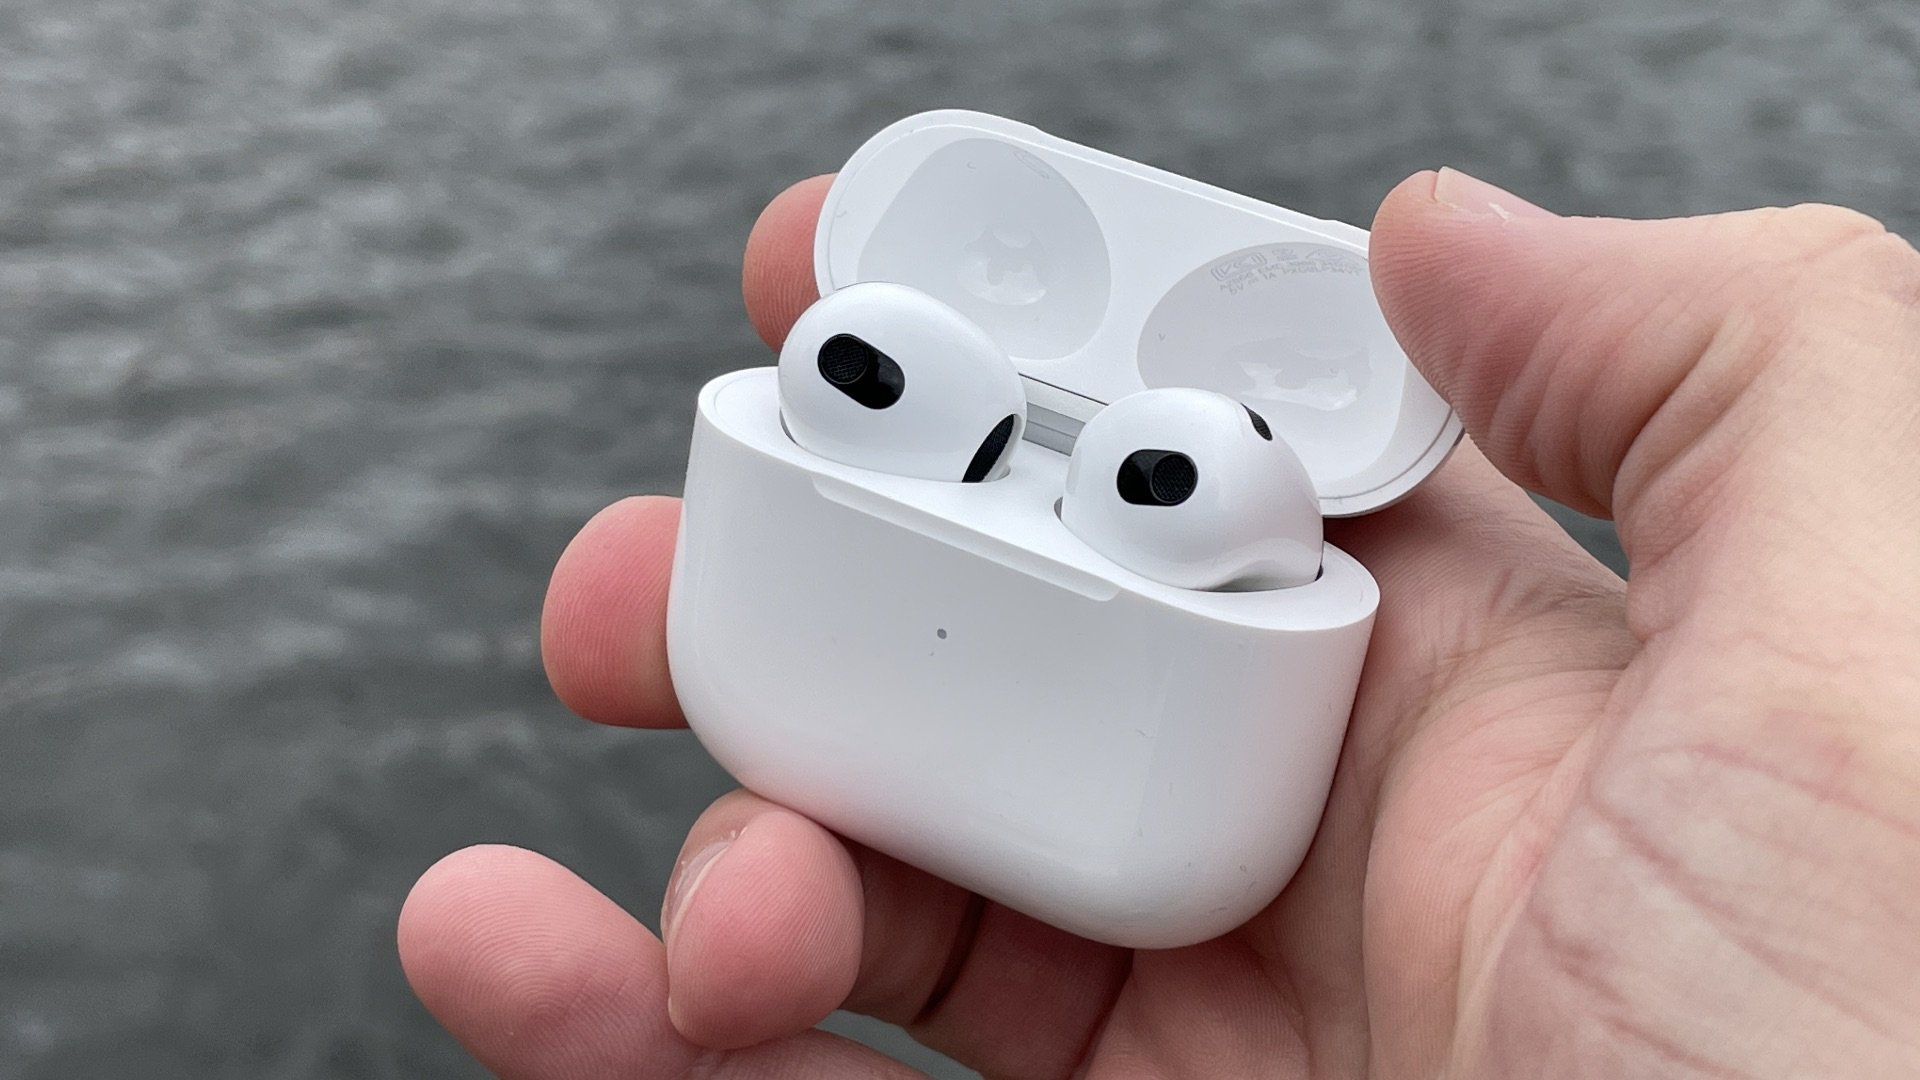 Apple AirPods (3rd Generation) with MagSafe Charging Case. With original AirPods box With Serial Number